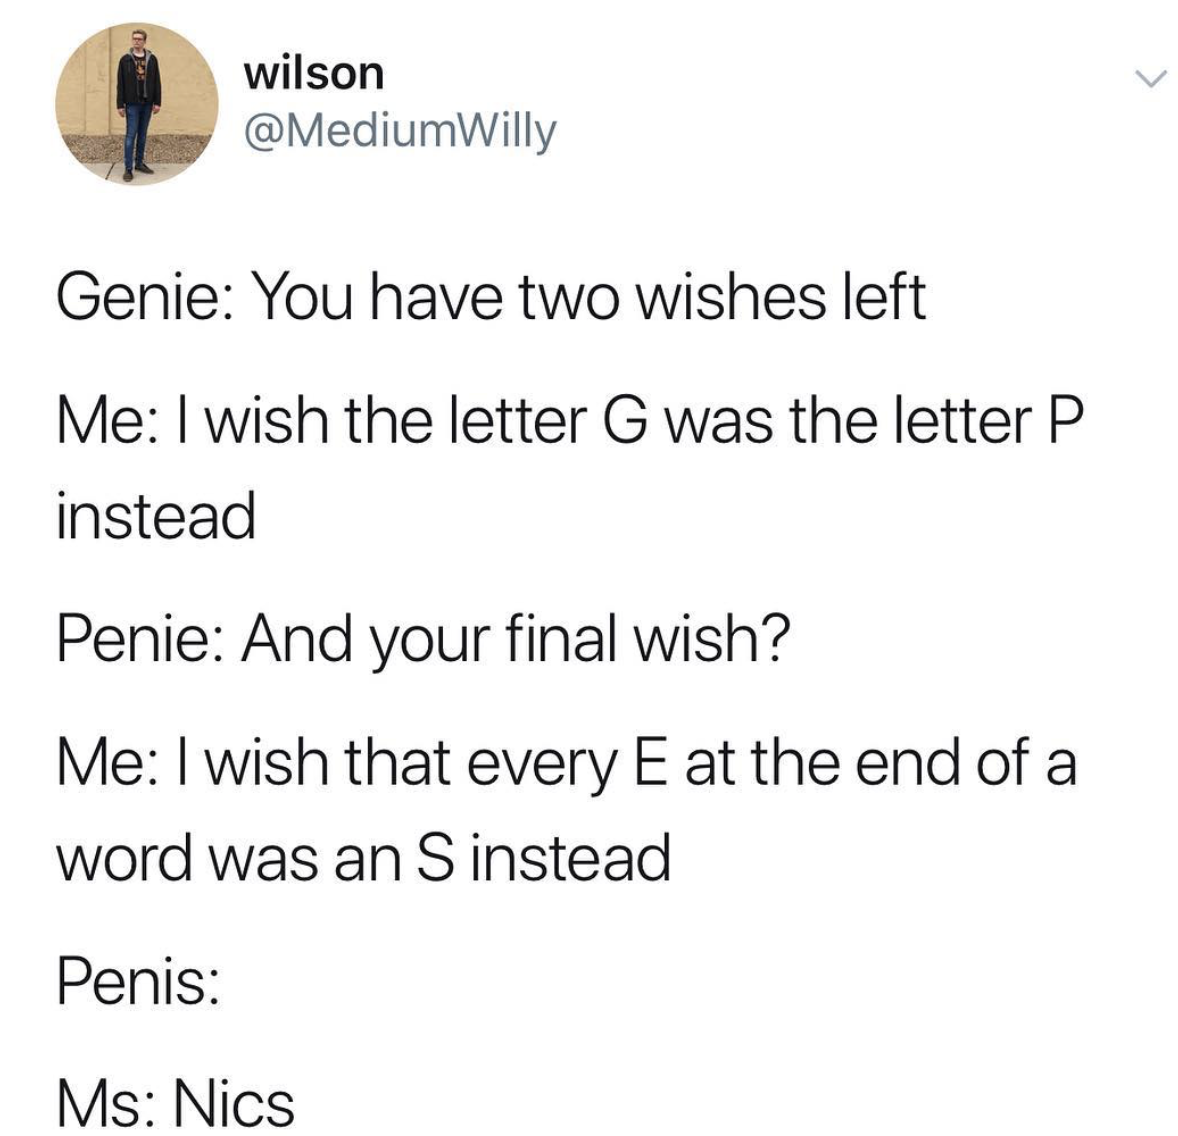 memes - document - wilson Genie You have two wishes left Me I wish the letter G was the letter P instead Penie And your final wish? Me I wish that every E at the end of a word was an S instead Penis Ms Nics